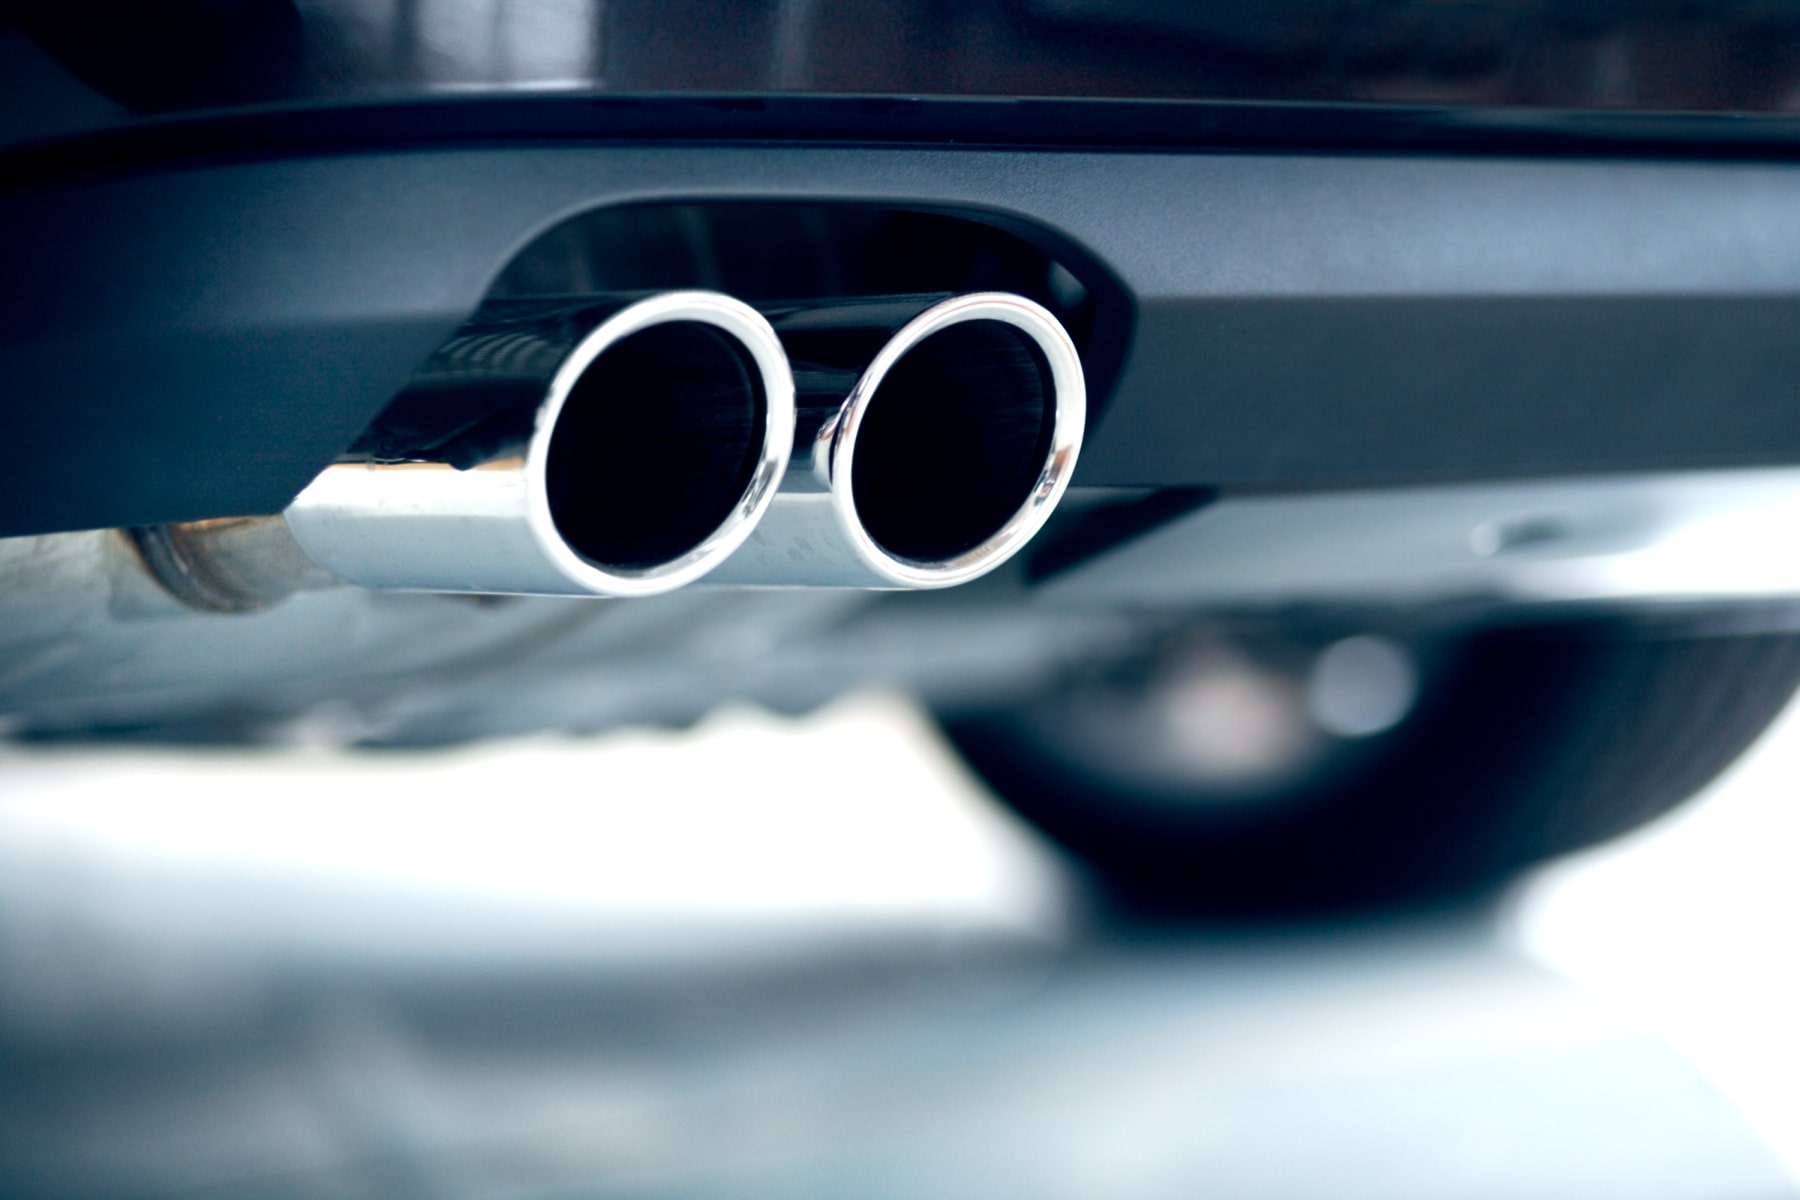 How do I Make My Car Exhaust Quieter Without Losing Performance